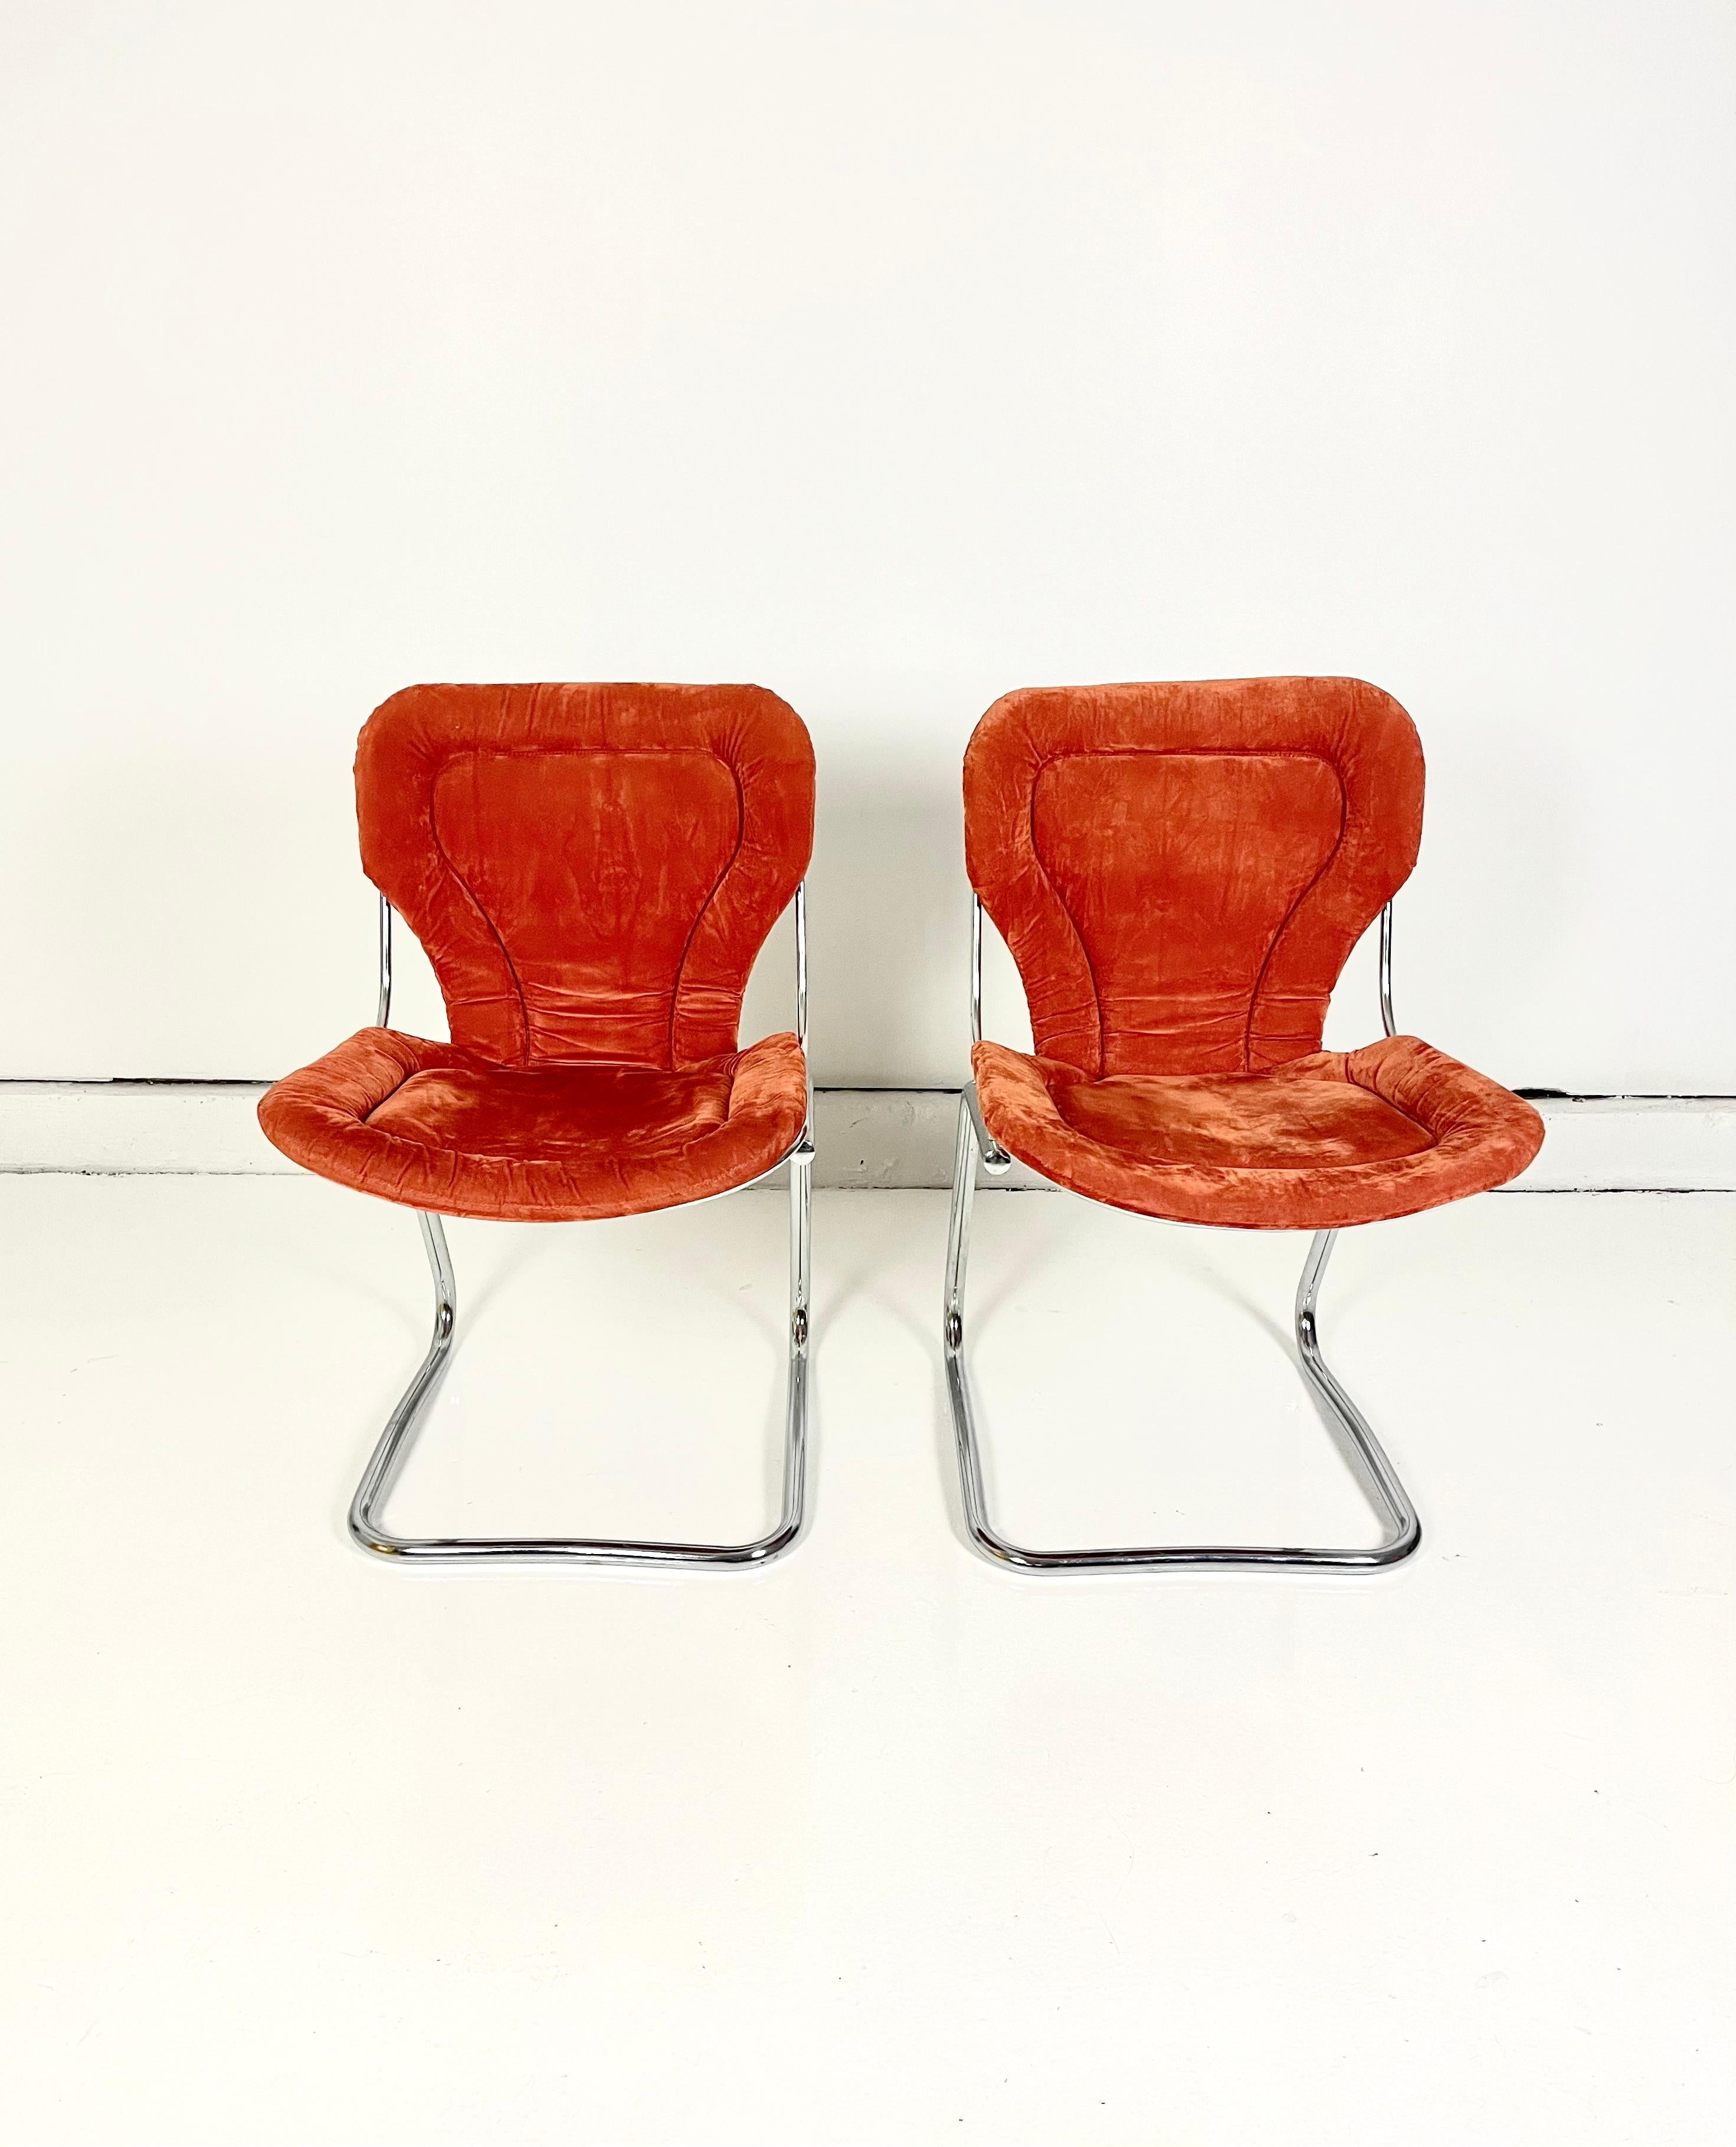 Chrome-plated steel wire frames with detachable orange cushions. Sold in pairs.